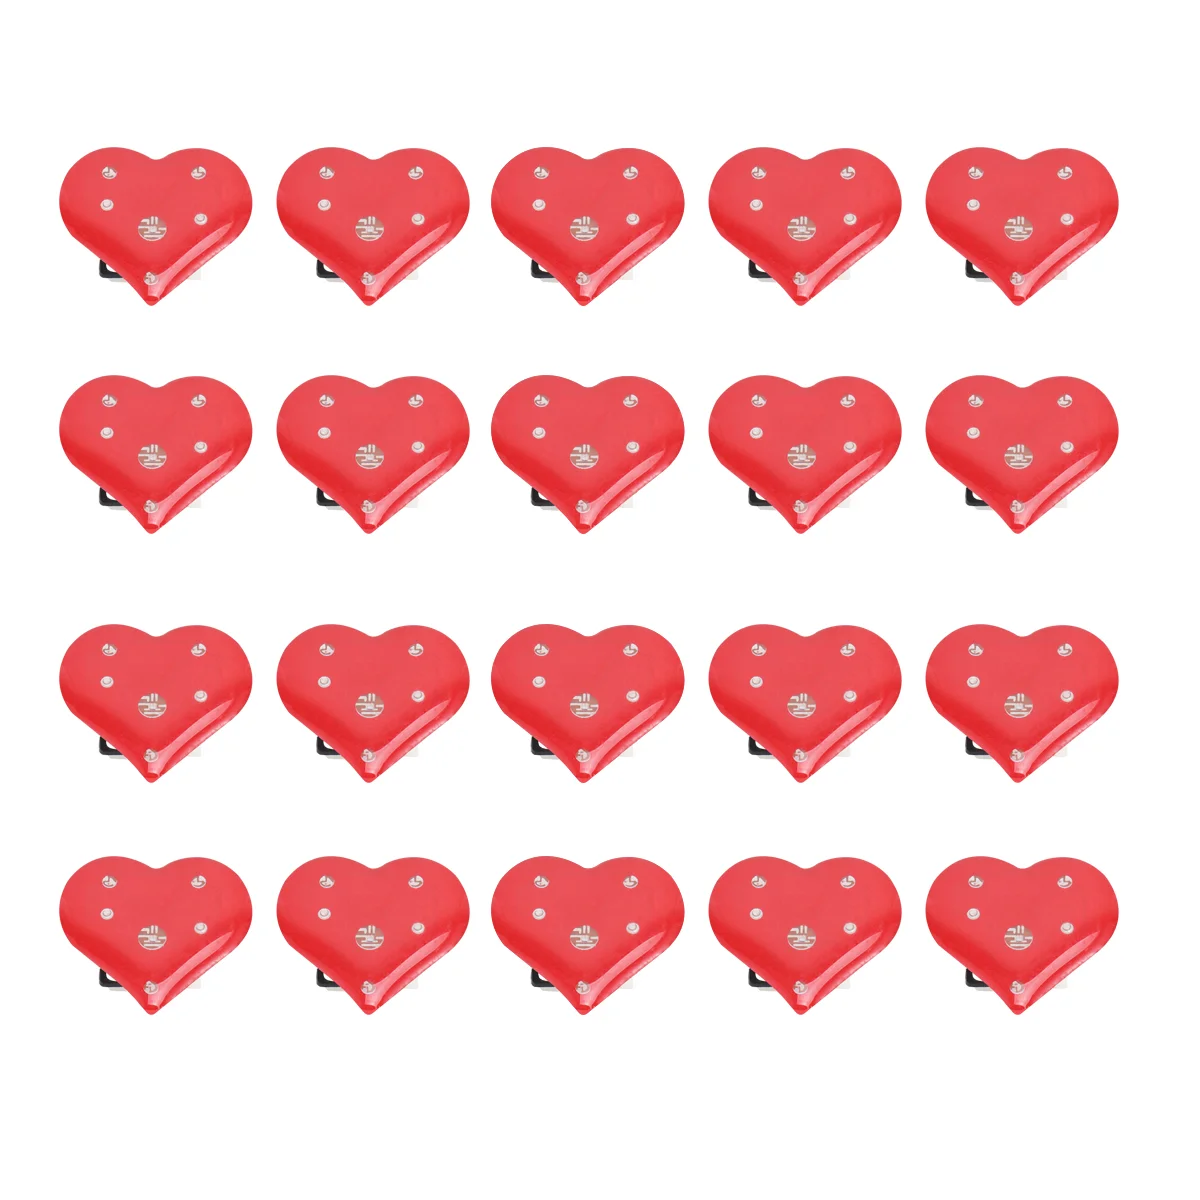 

25pcs Red Heart Shape Brooch Luminous Breastpin Flashing Lapel Glowing Brooch Valentines Day Supplies Gift Dress Up Props Decor